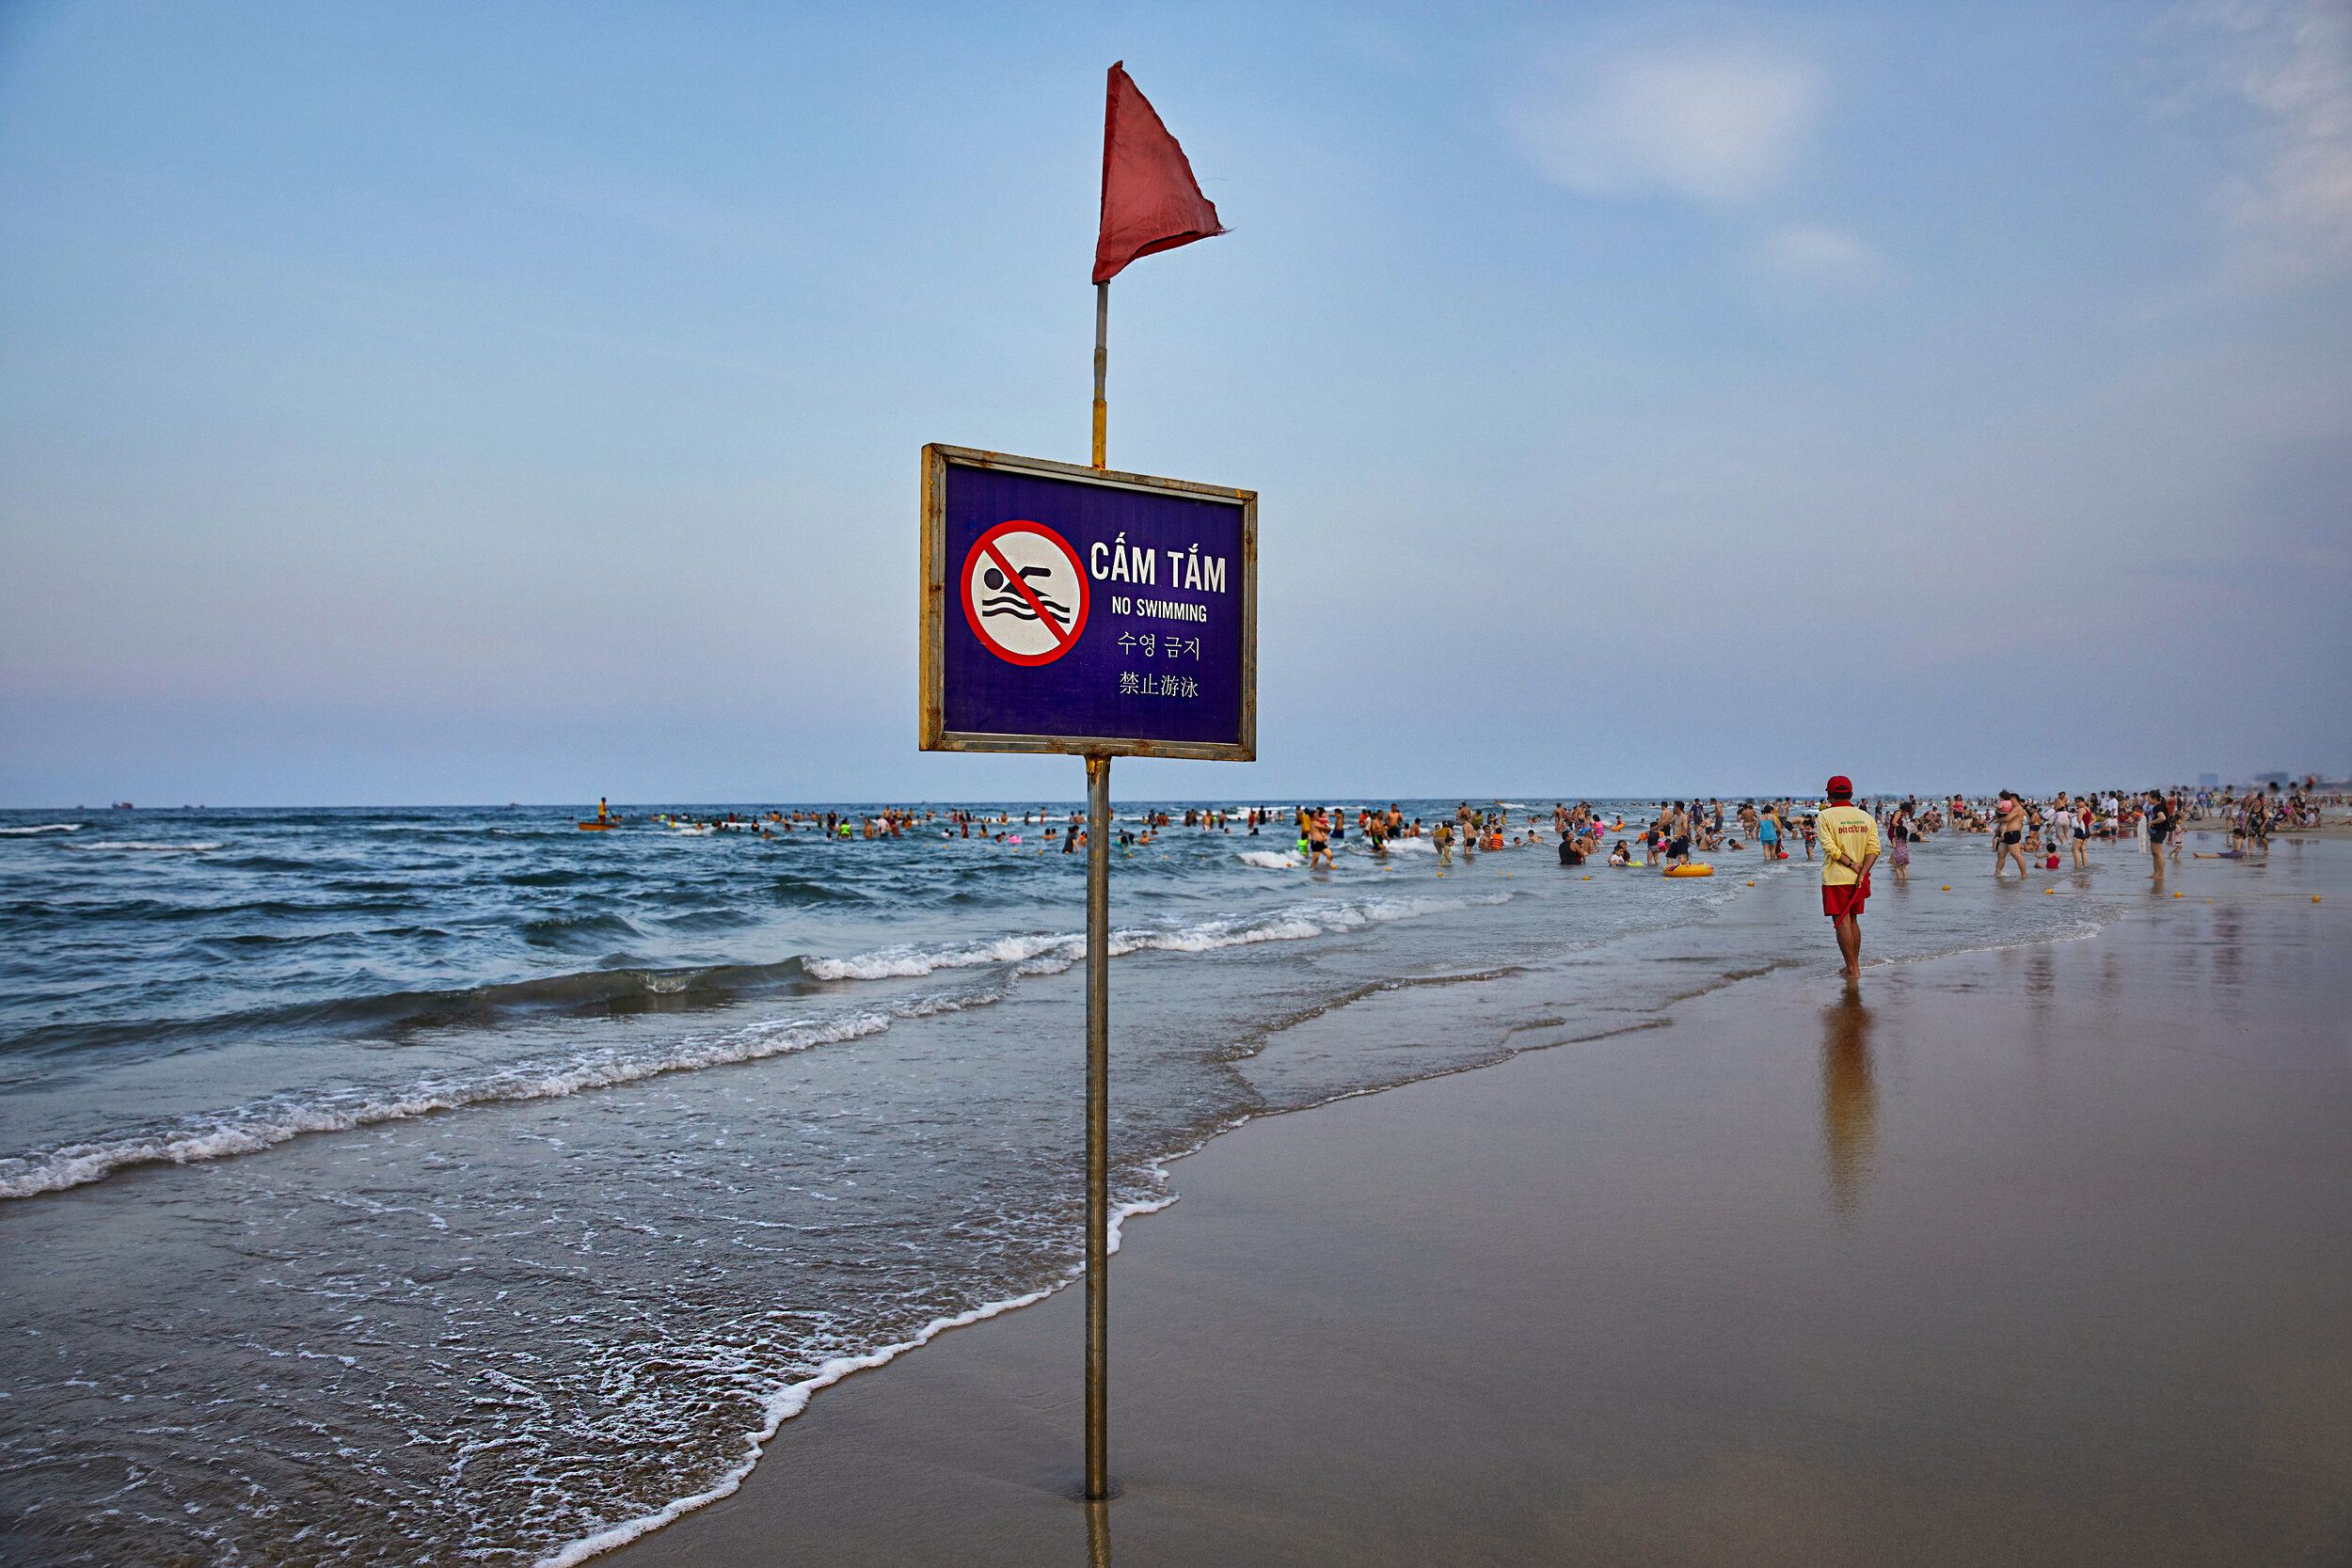  No swimming sign at My Khe beach in Da Nang, Vietnam.  By May, lulled by notions that the country had completely beaten Covid-19– with its stringent lockdowns, early mandated mask-wearing, and contact tracing–people in this city, returned to their w